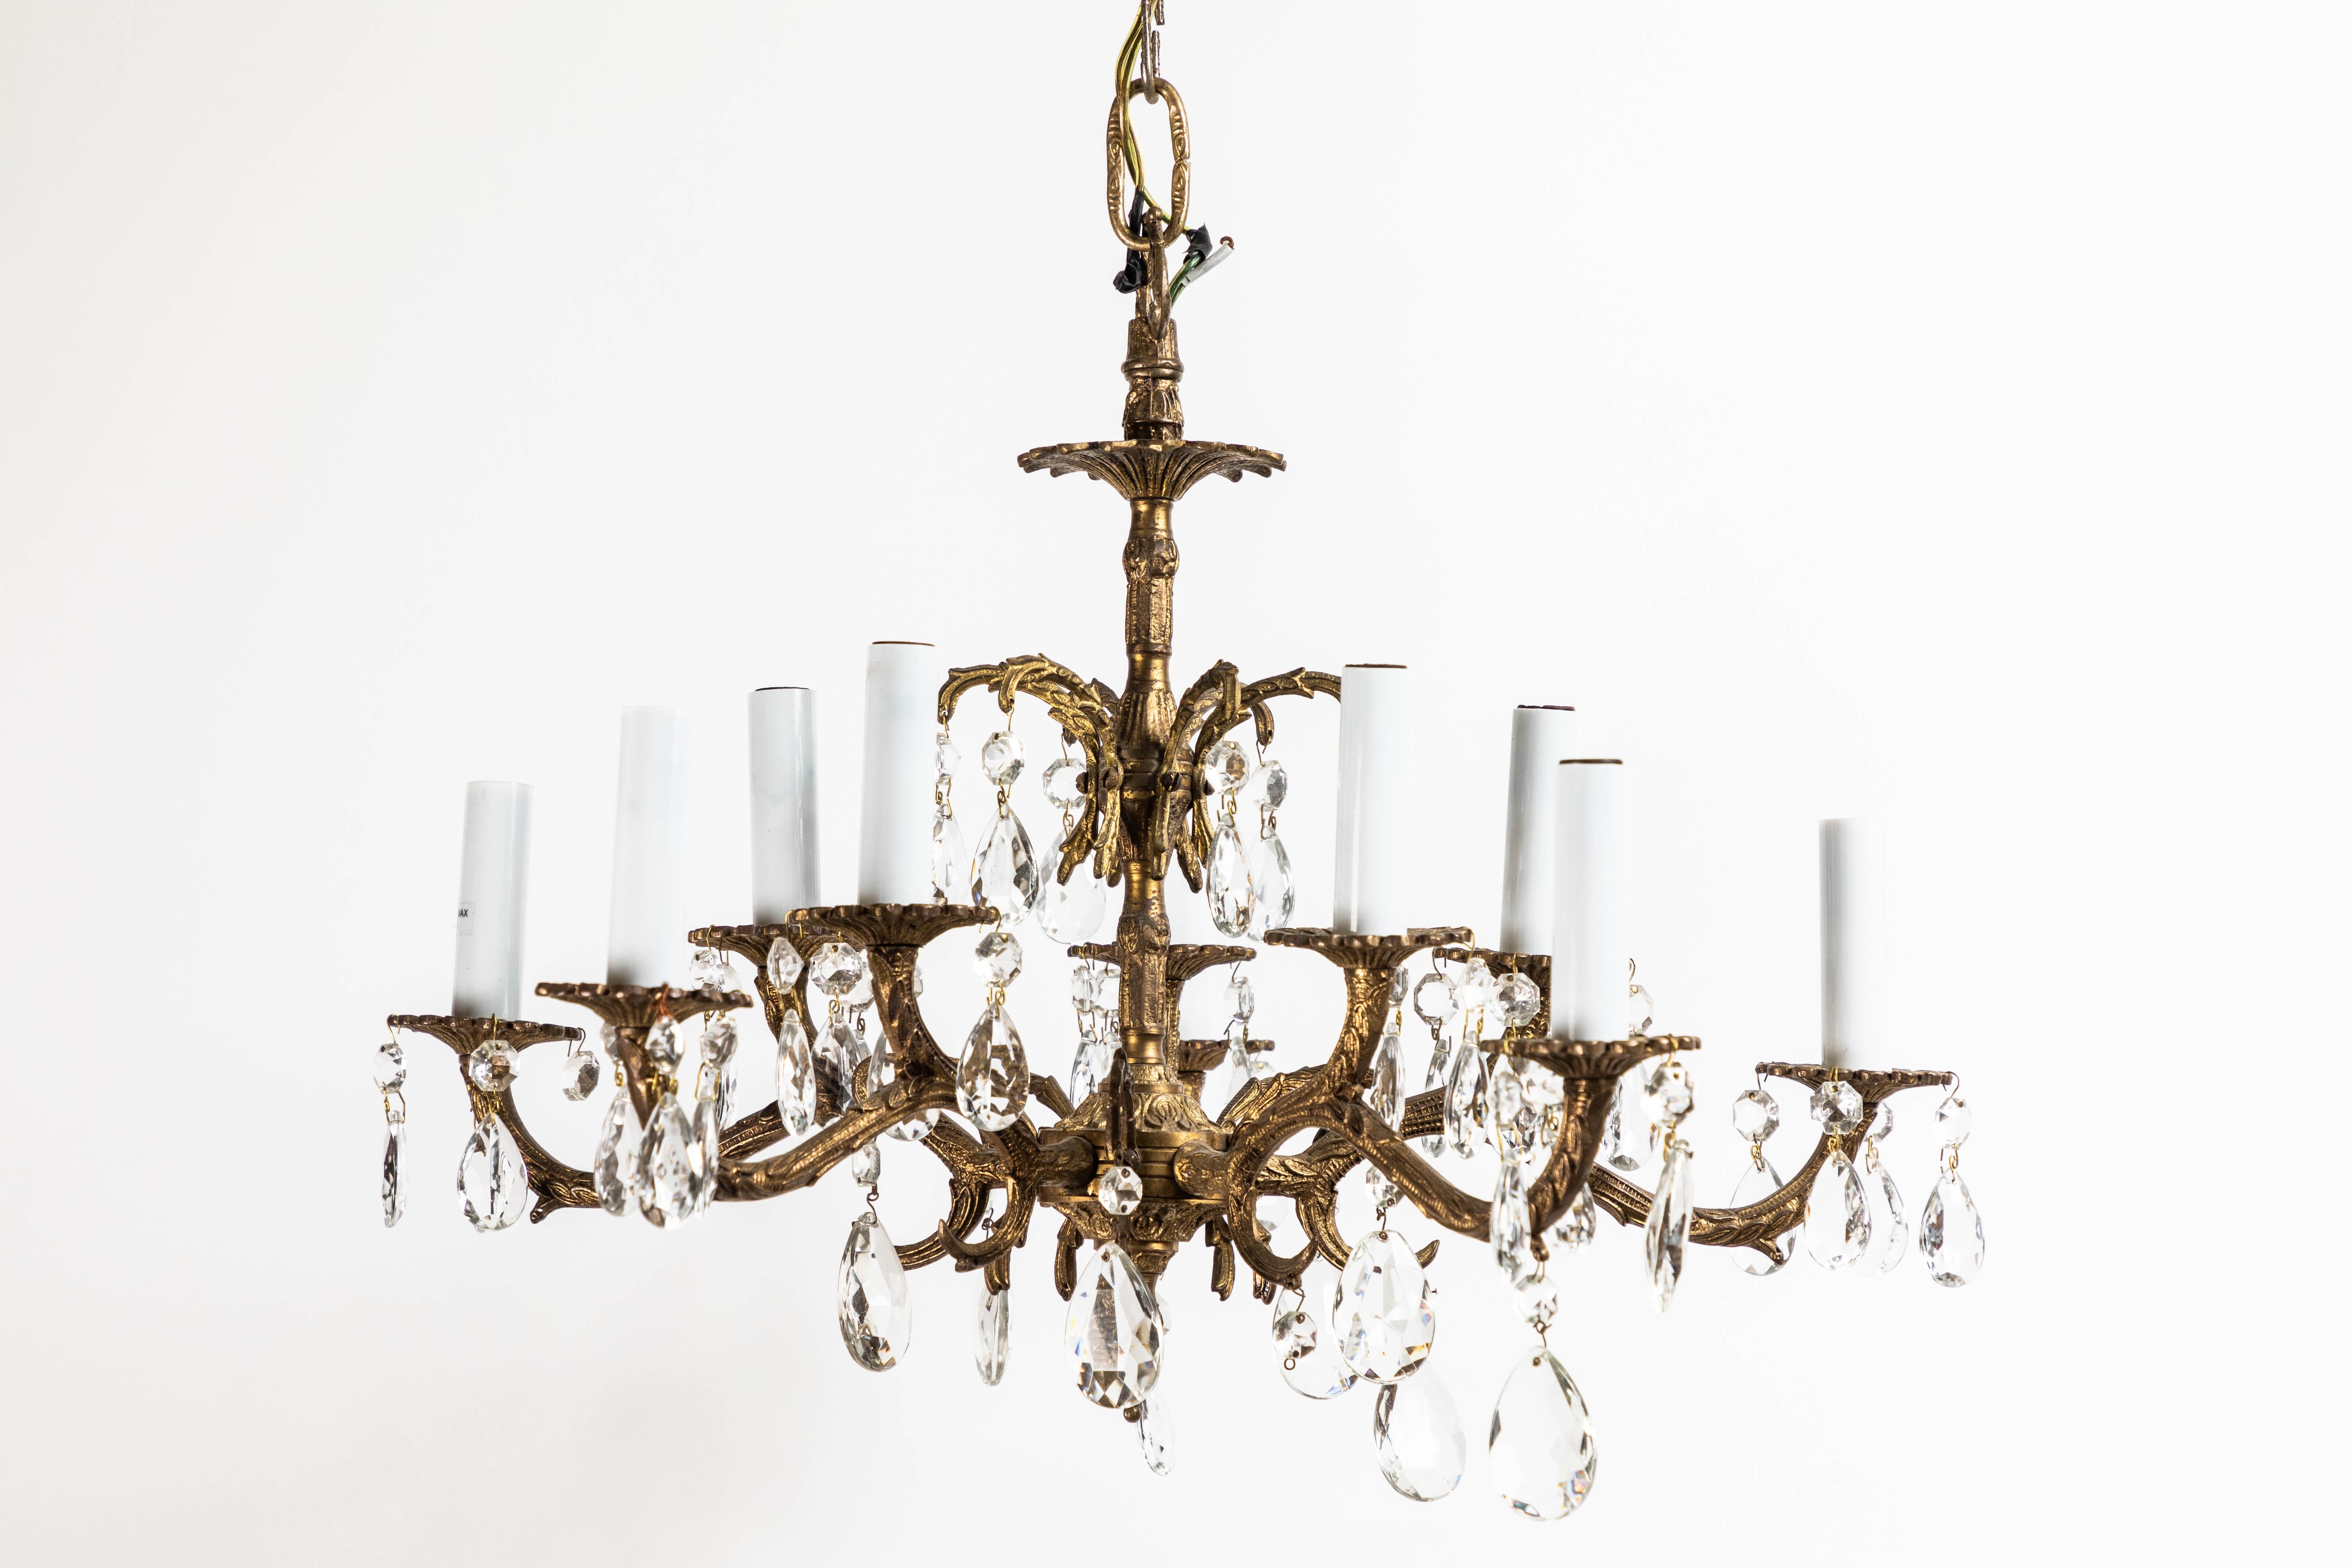 Stately 10-light French Belle Époque style ormolu gilded bronze and crystal chandelier with shades and decorative bronze canopy. 20th century, wired for USA. Measures: 12